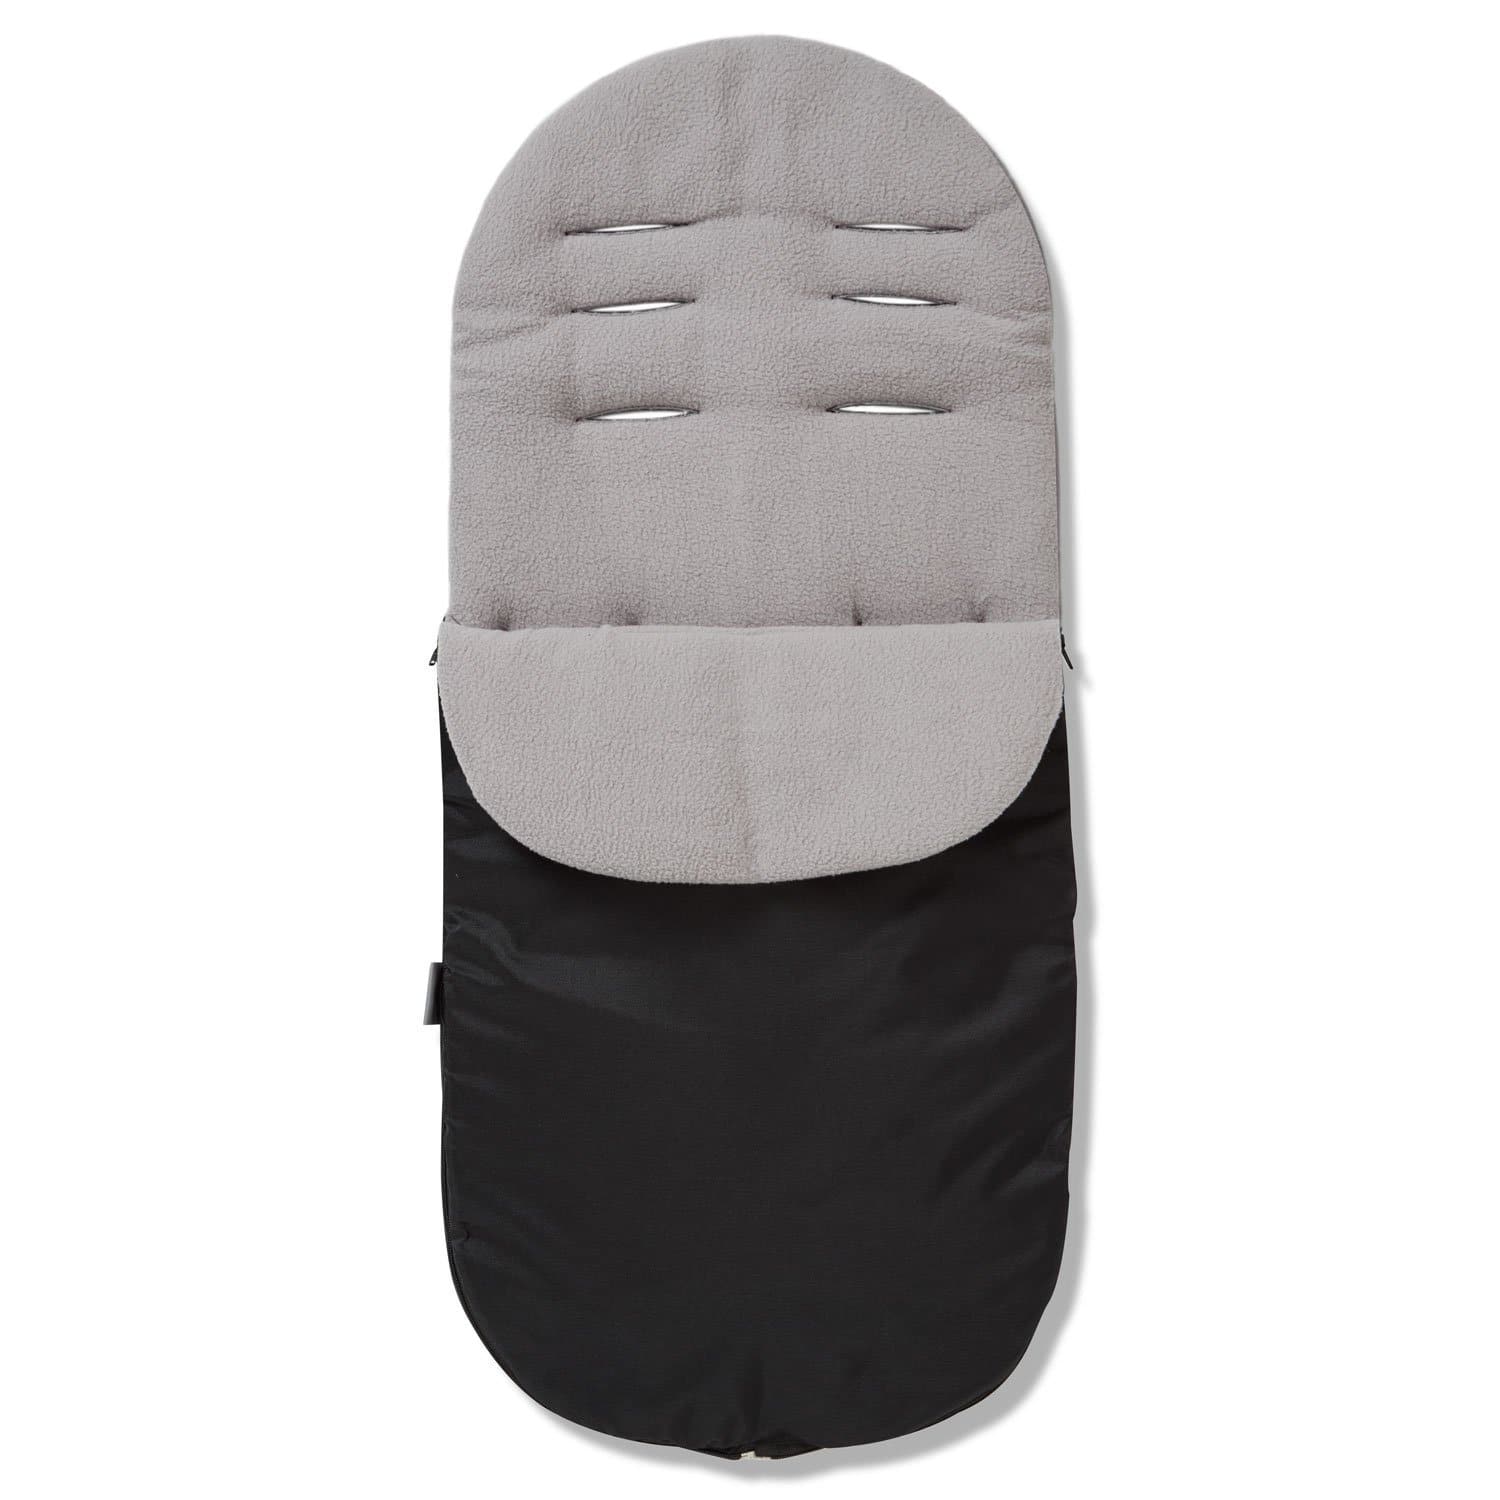 Footmuff / Cosy Toes Compatible with My Child - For Your Little One